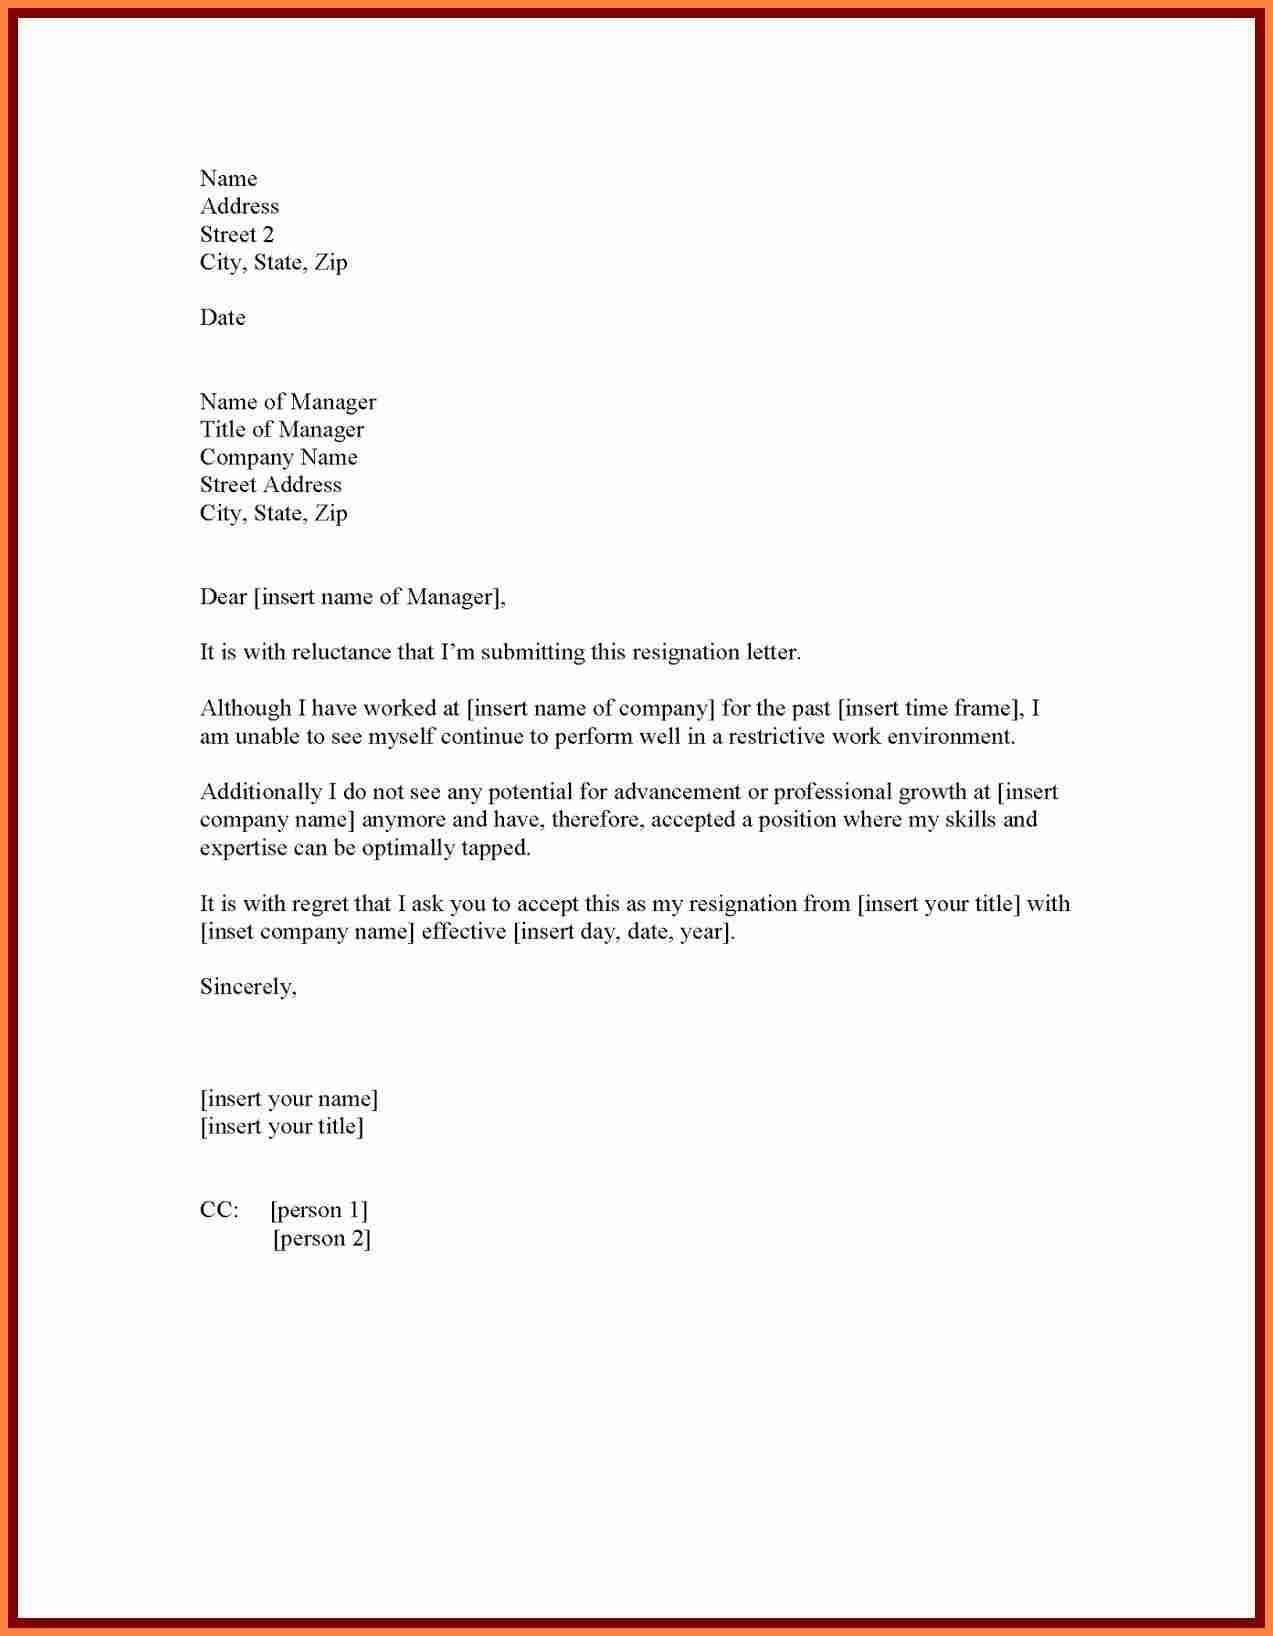 I Quit Letter Template Examples | Letter Template Collection pertaining to Template For Resignation Letter Singapore